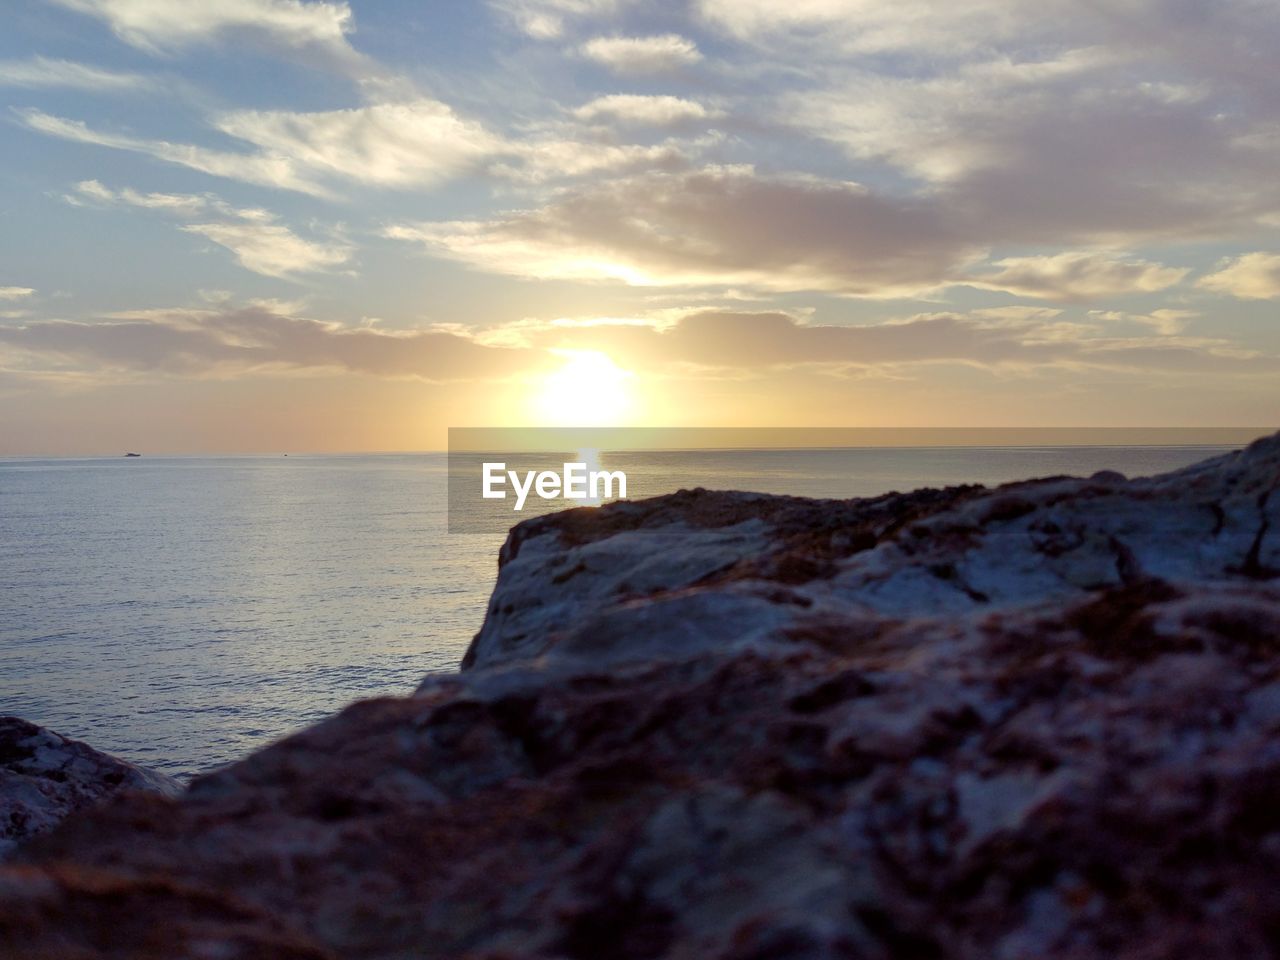 SCENIC VIEW OF ROCKY BEACH AGAINST SKY DURING SUNSET